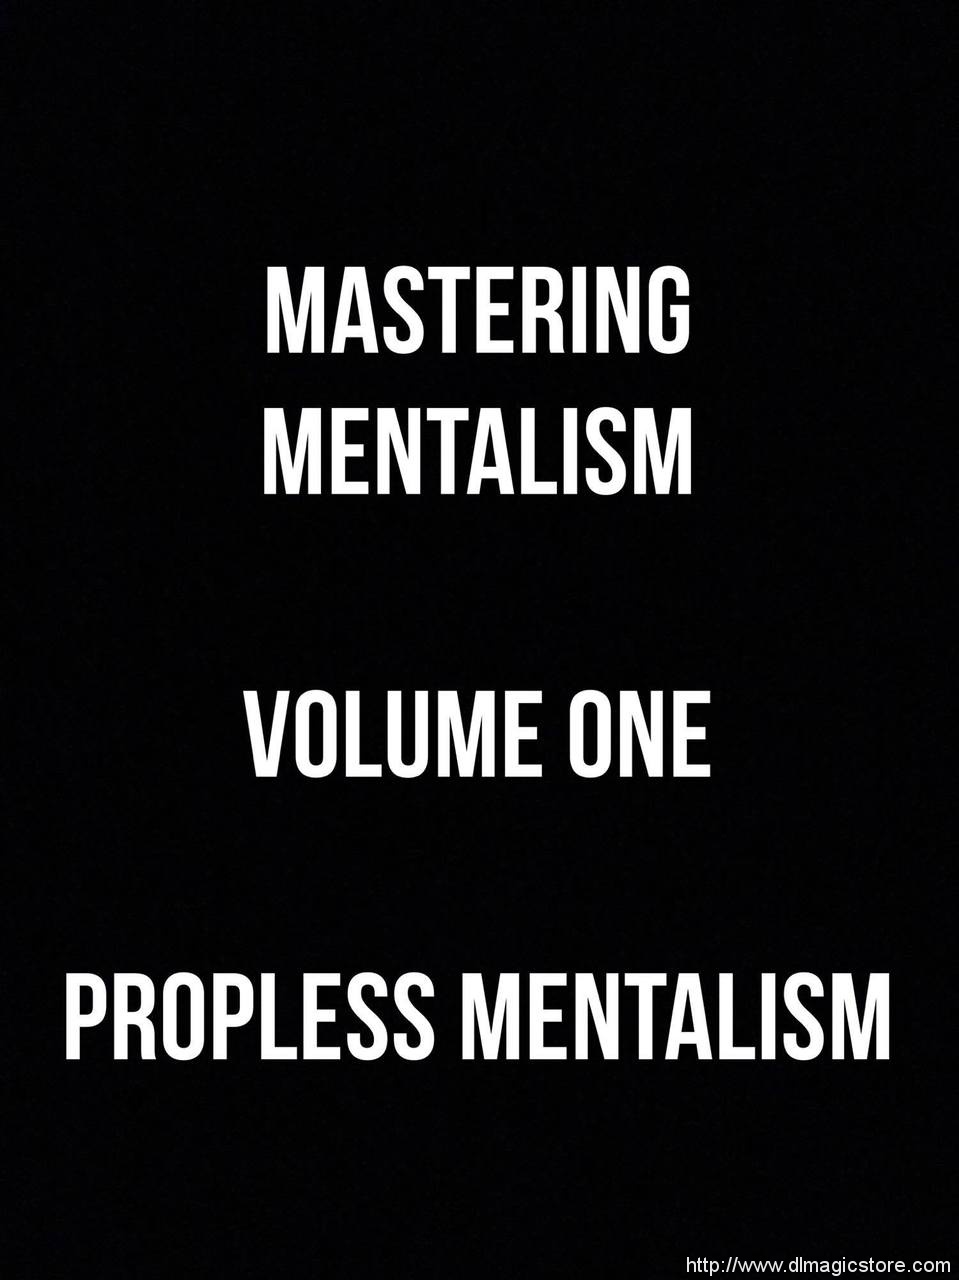 Mastering Mentalism Volume 1 Propless by Sam Wooding (Instant Download)